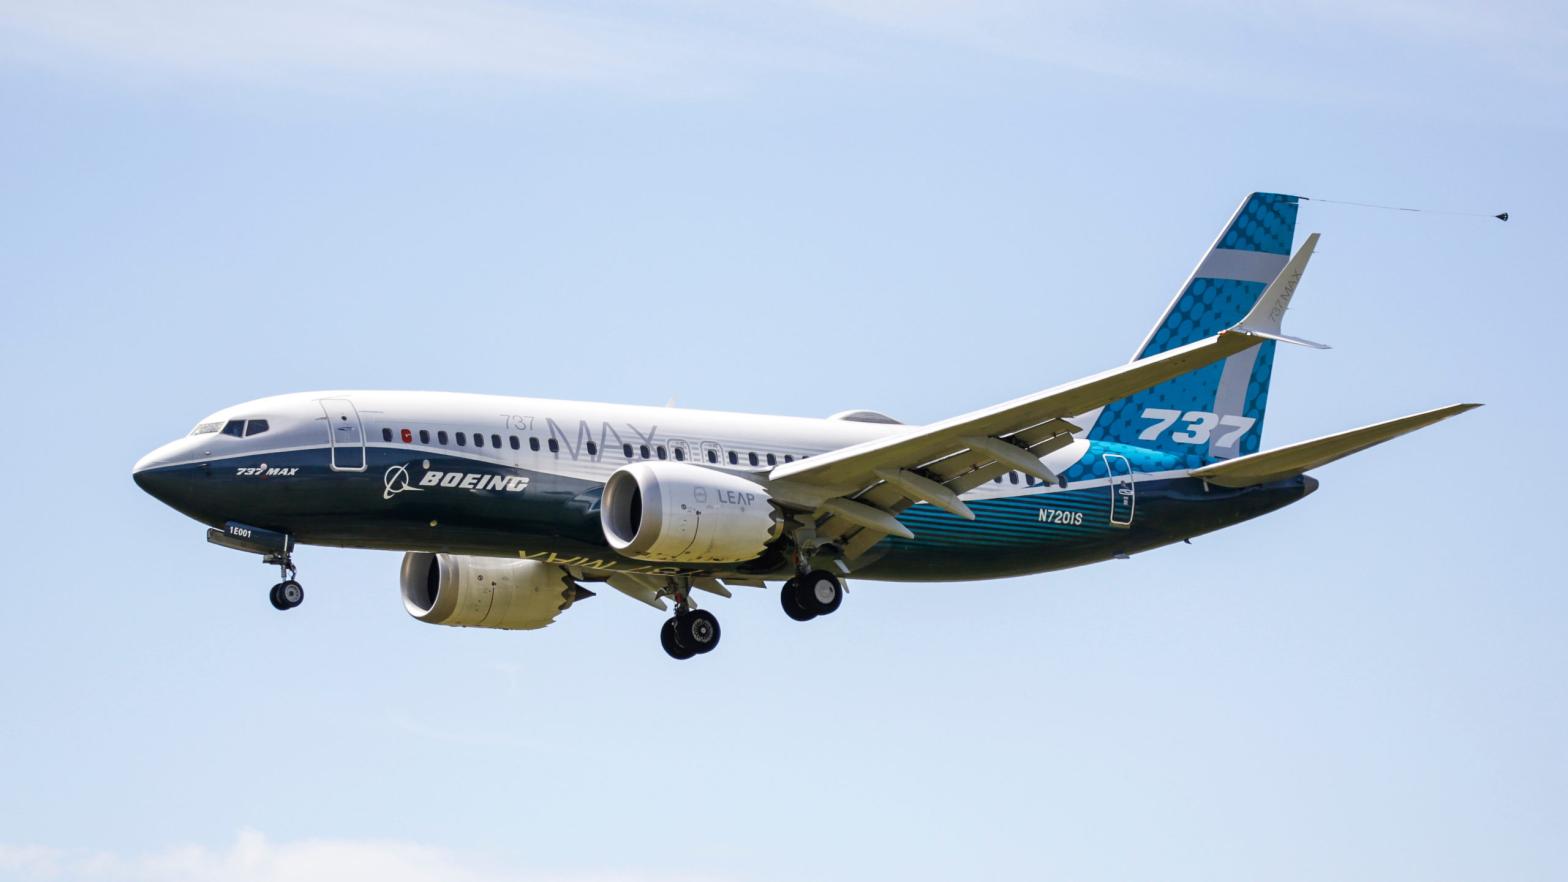 A Boeing 737 MAX jet comes in for a landing following a Federal Aviation Administration (FAA) test flight at Boeing Field in Seattle, Washington on June 29, 2020. (Photo: Jason Redmond, Getty Images)